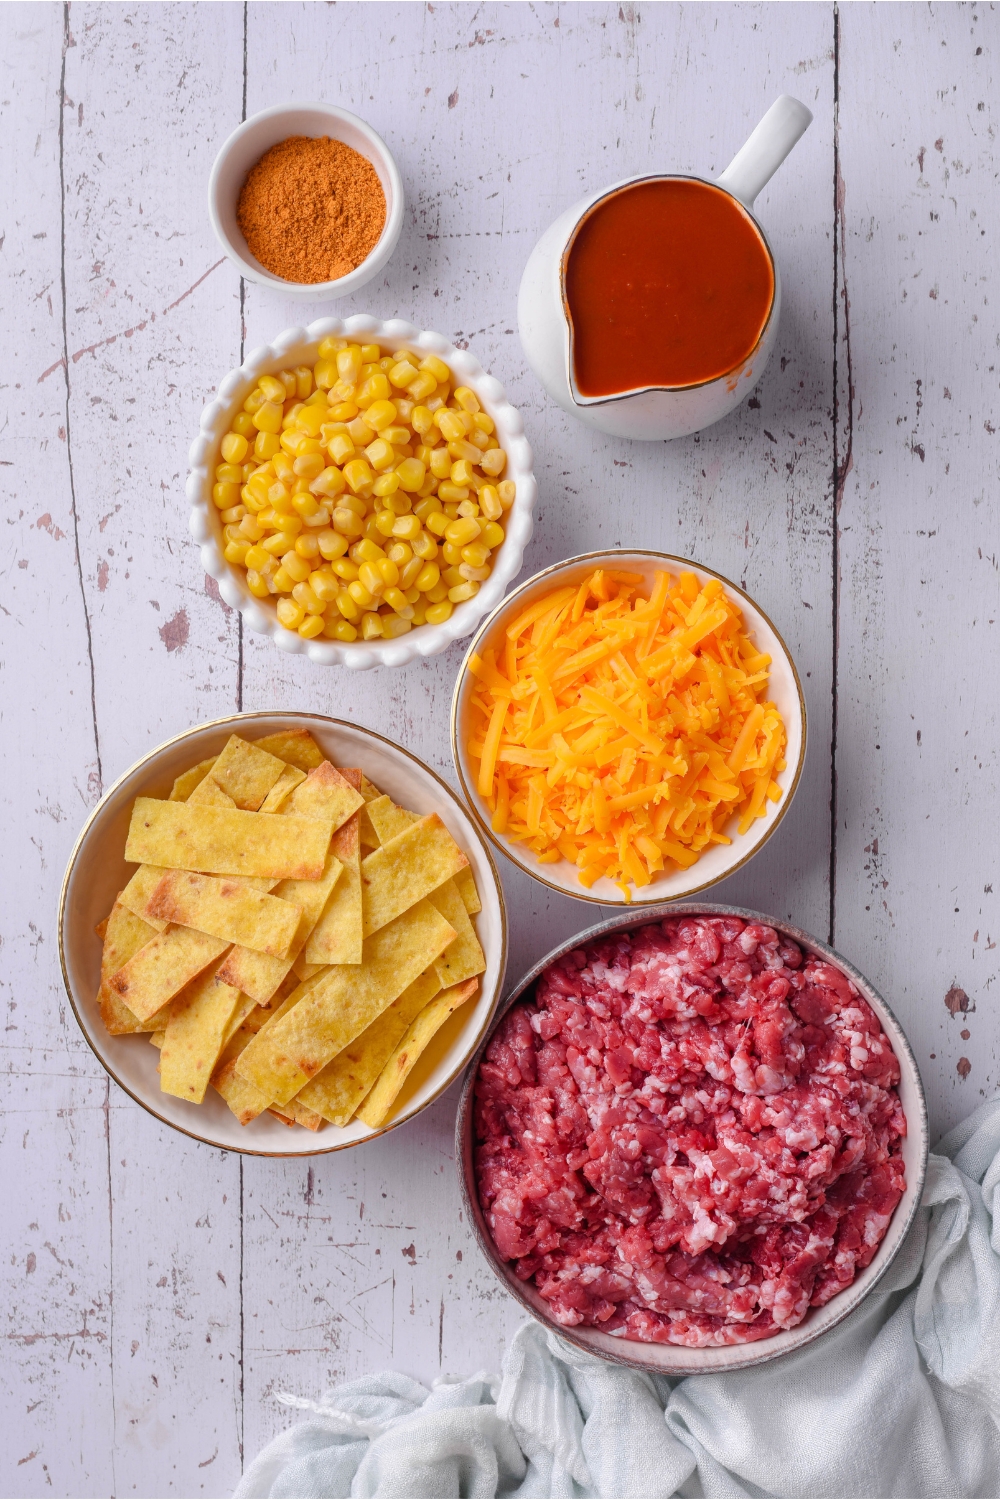 A bowl of corn, a bowl of taco seasoning, a bowl of shredded cheddar cheese, a bowl of fritos, and a bowl of ground beef all on a white counter.